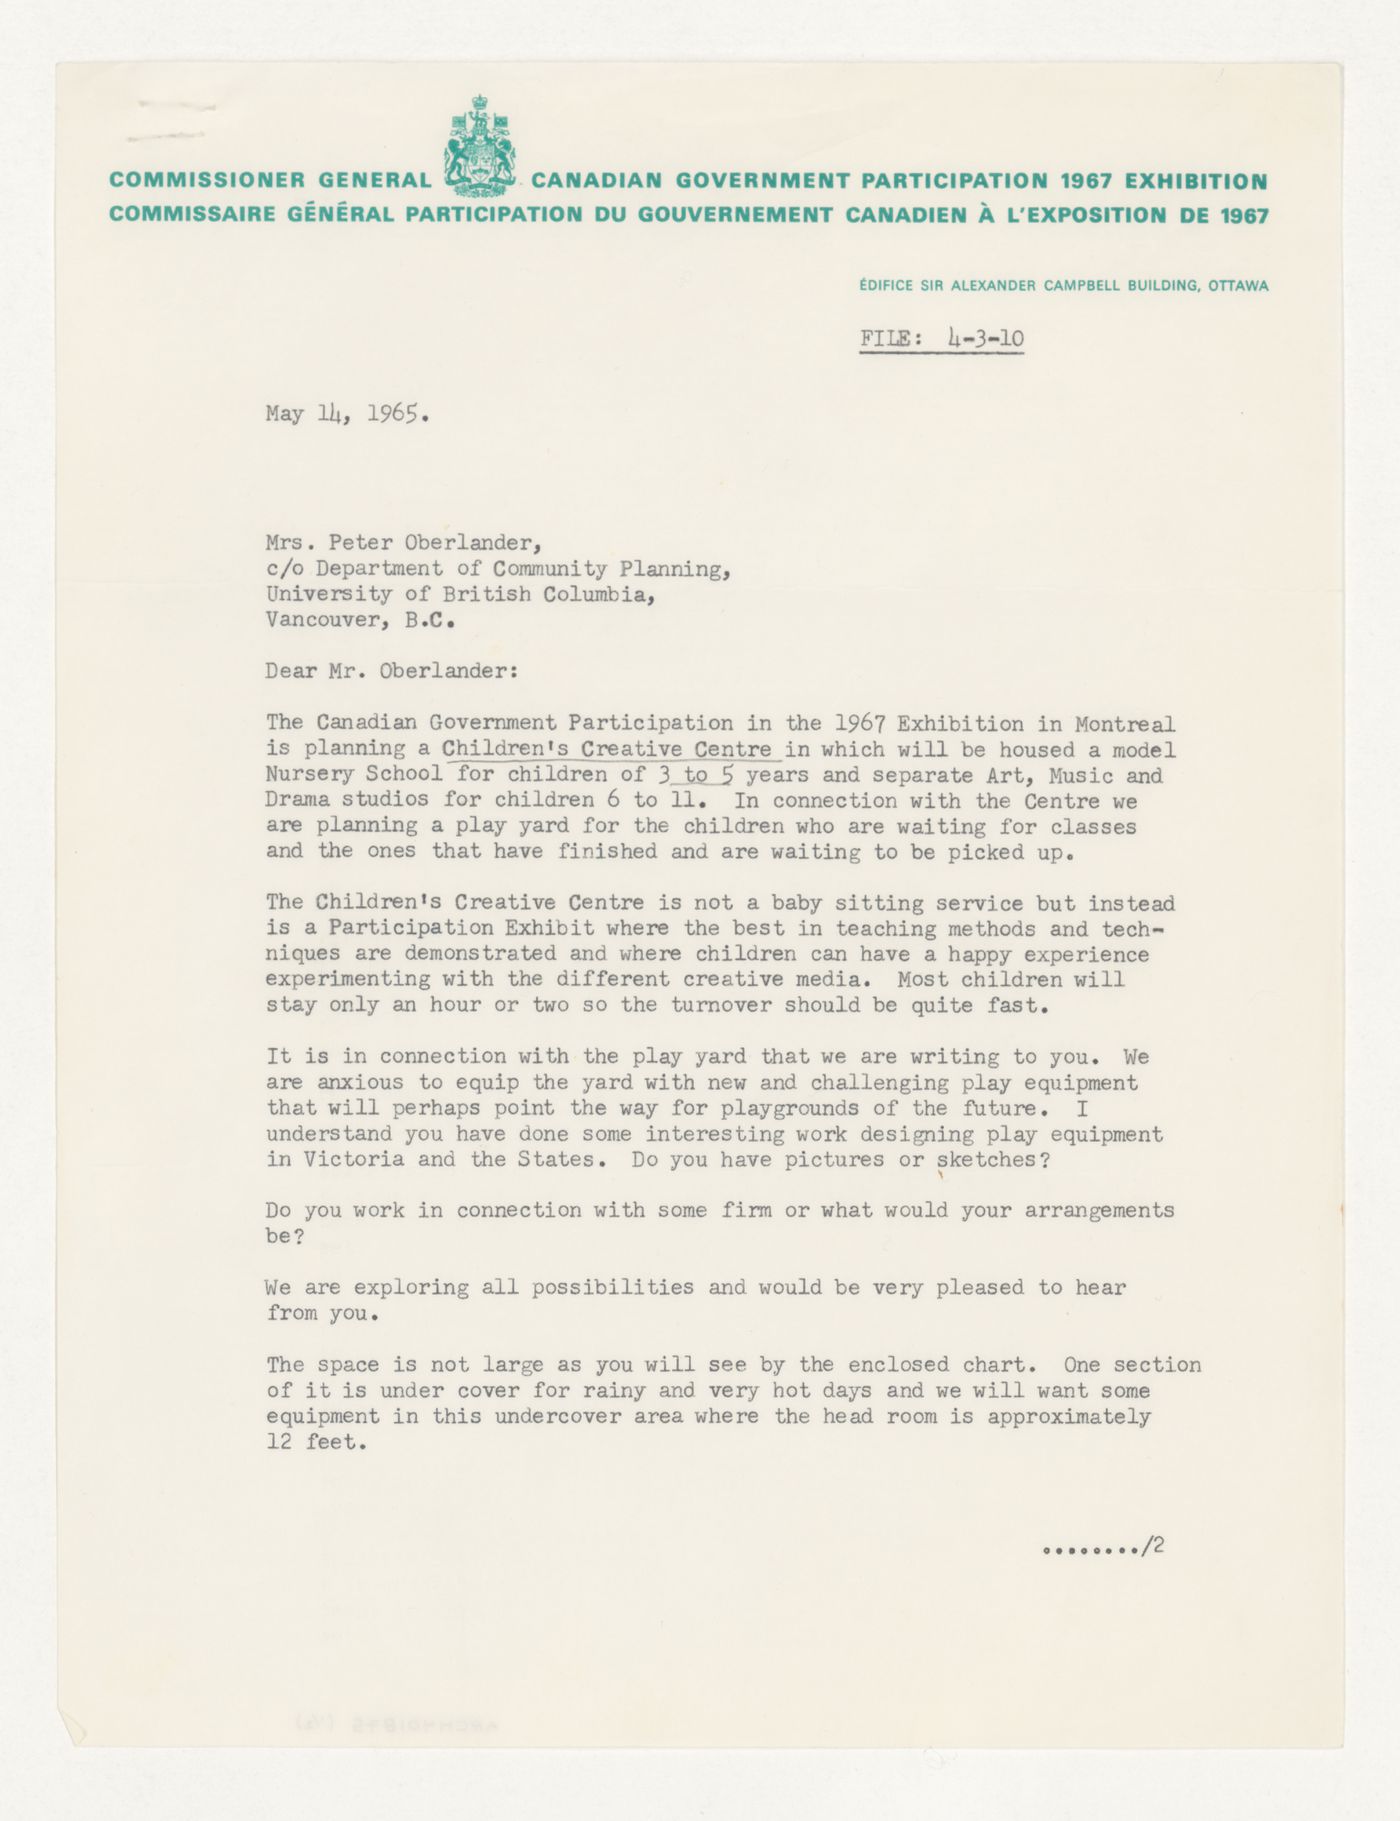 Letter from the Commissioner General of the Canadian Government Participation in Expo '67 inviting Cornelia Hahn Oberlander to contribute to the Children's Creative Centre Playground, Canadian Federal Pavilion, Expo '67, Montréal, Québec